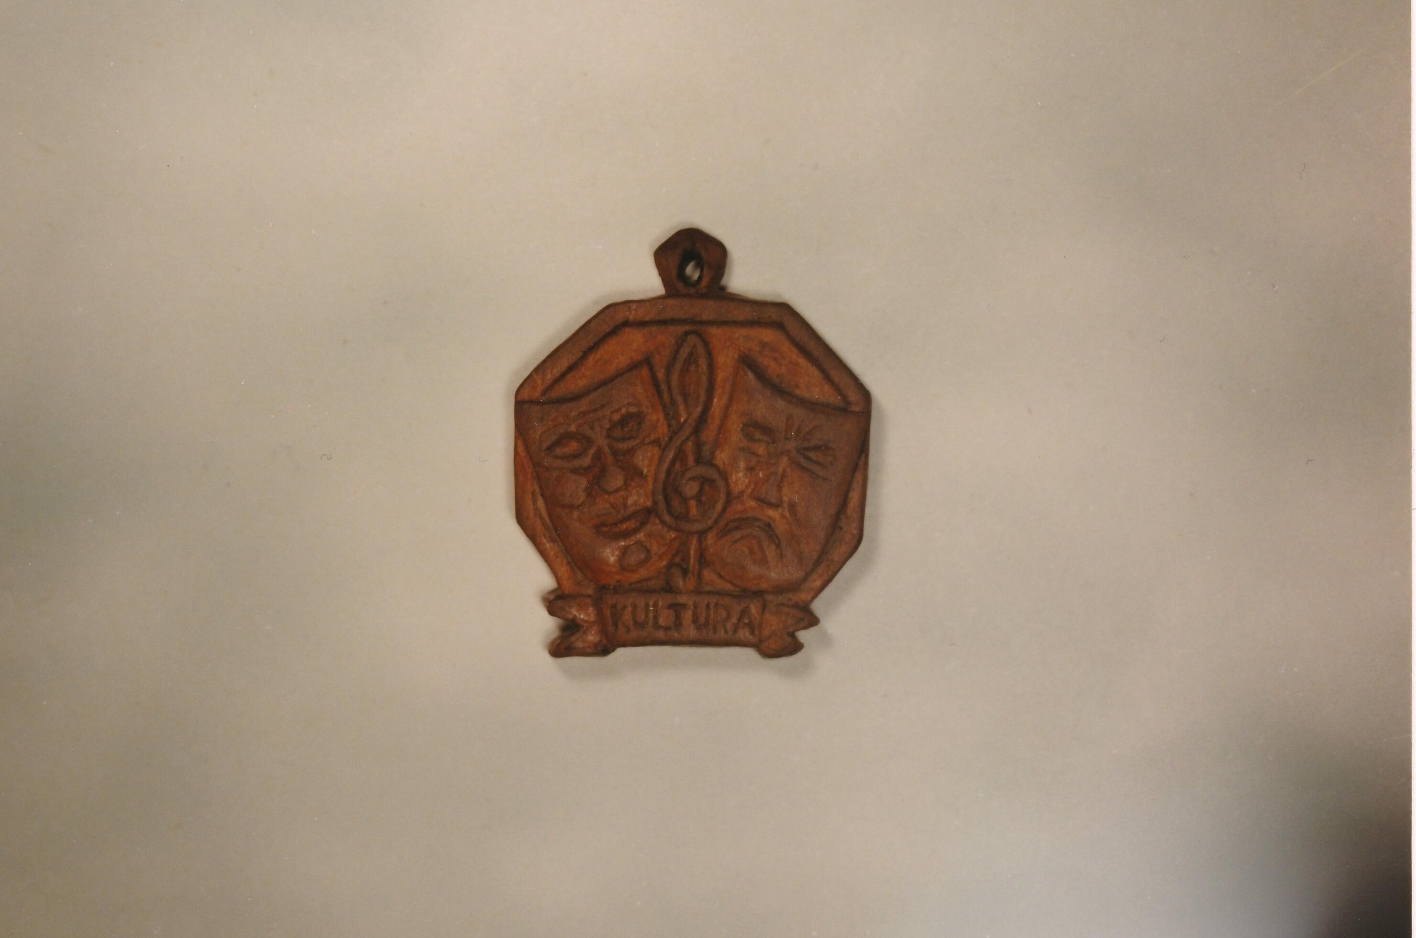 Wooden pendant from an in-house production of Goethe's Faust from 1946. The pendant is octagonal and shows a laughing and a sad mask next to each other.